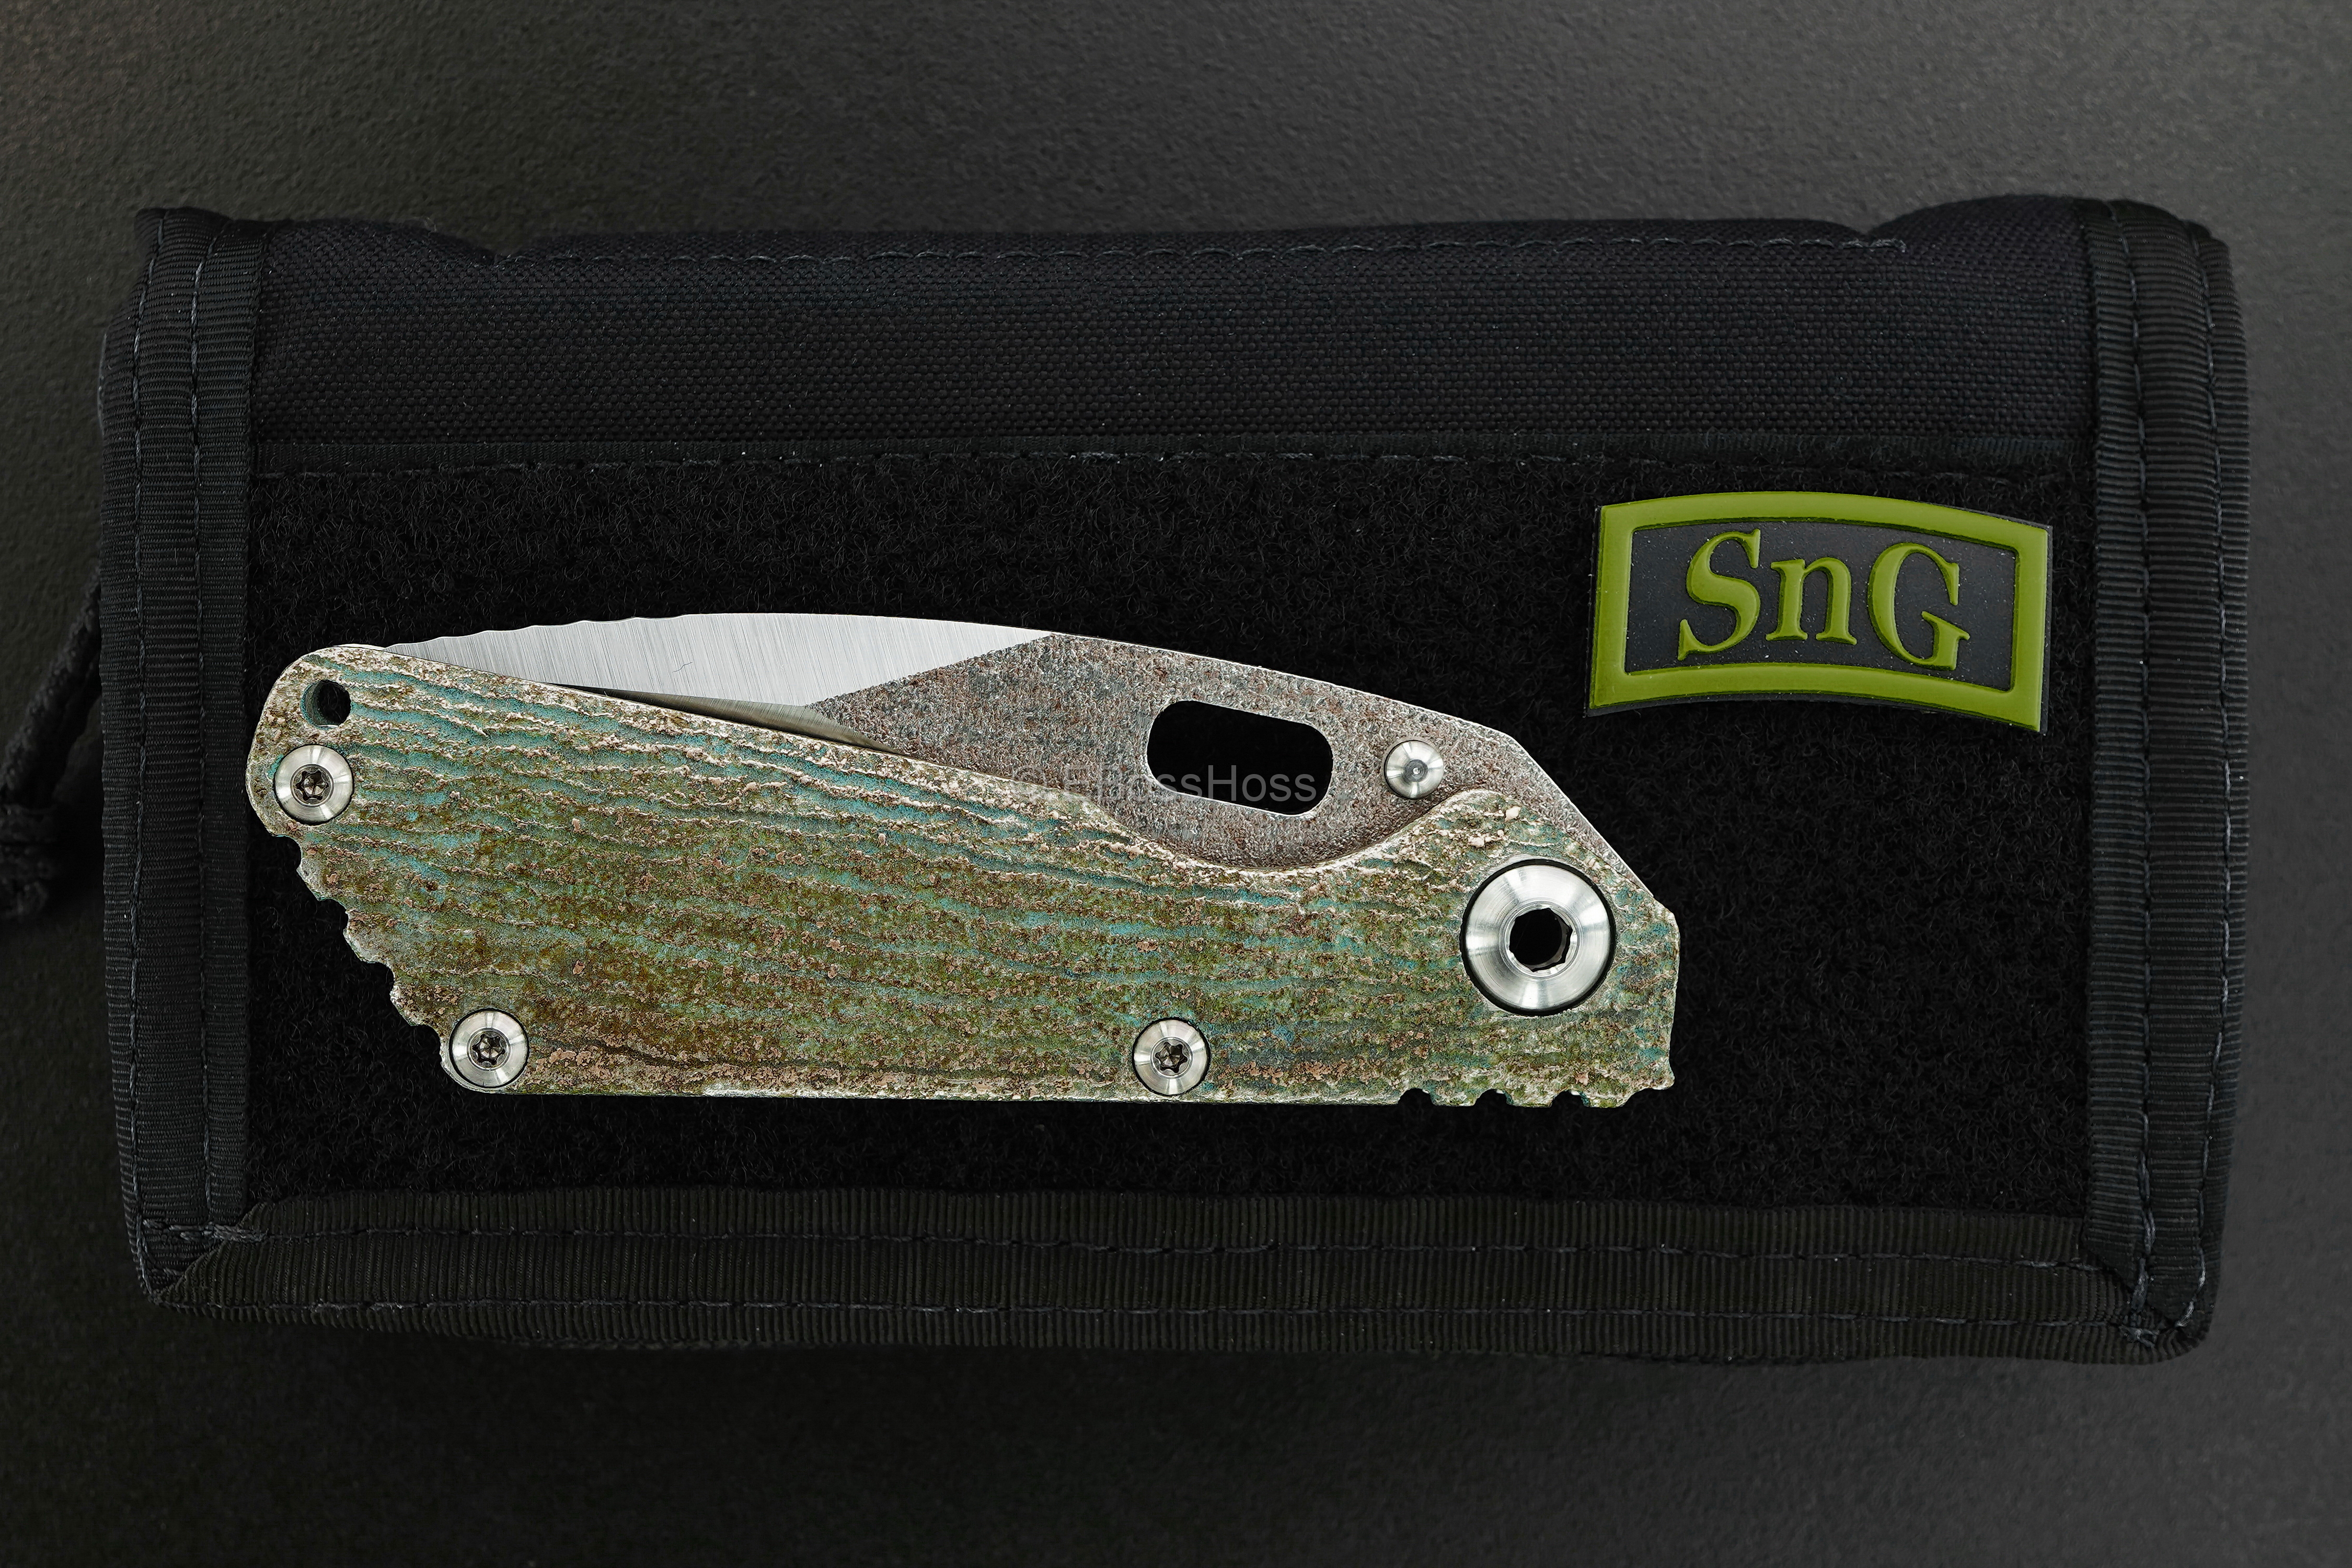 Mick Strider (MSC) Custom Wharncliffe SnG - Exceptional Groot-Texture by Forrest Strider